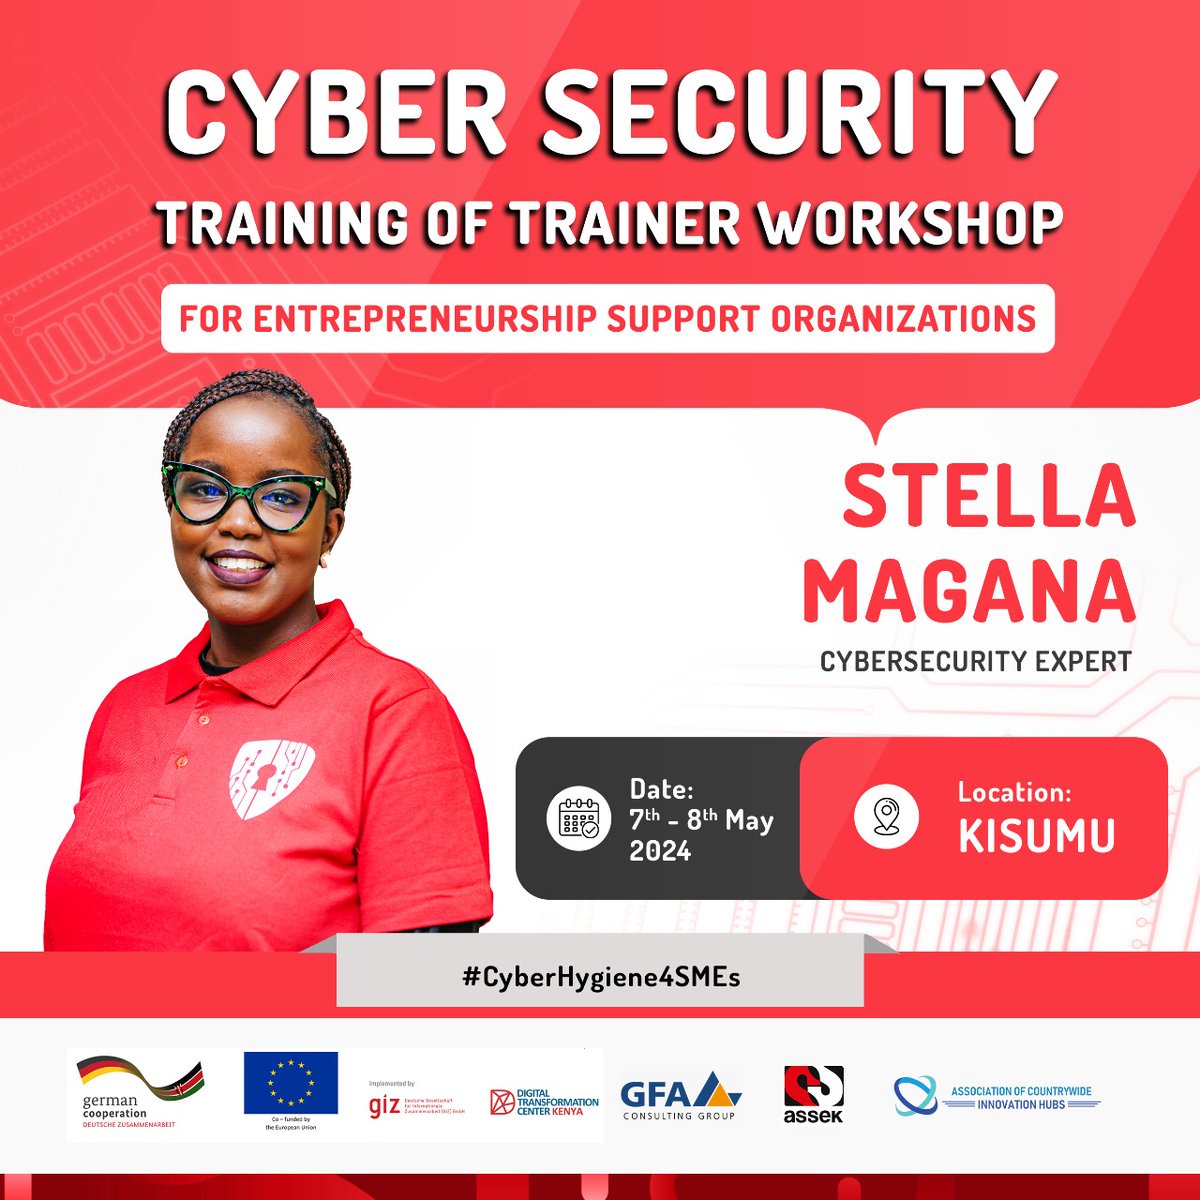 To the lakeside community, get ready for #CyberHygiene4SMEs workshop and symposium with cyber security master trainer, @STLmagana. Save the dates and spread the word. #Kisumu #tech #hubs @giz_gmbh @EUinKenya @DTC_Kenya @ASSEKnews @CountrywideHubs